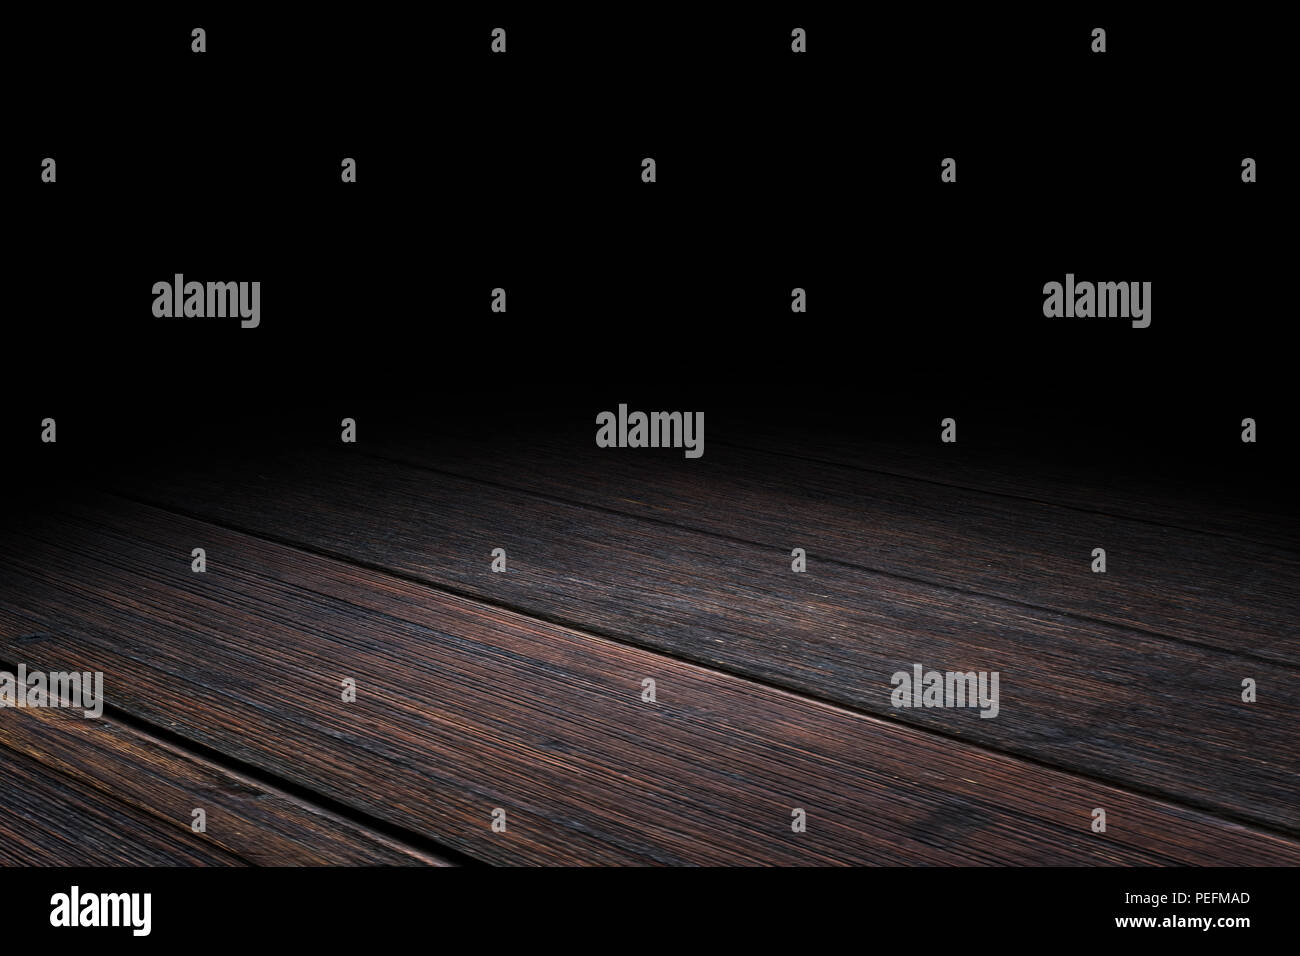 Dark Plank old wood floor texture perspective background for display or montage of product,Mock up template for your design. Stock Photo